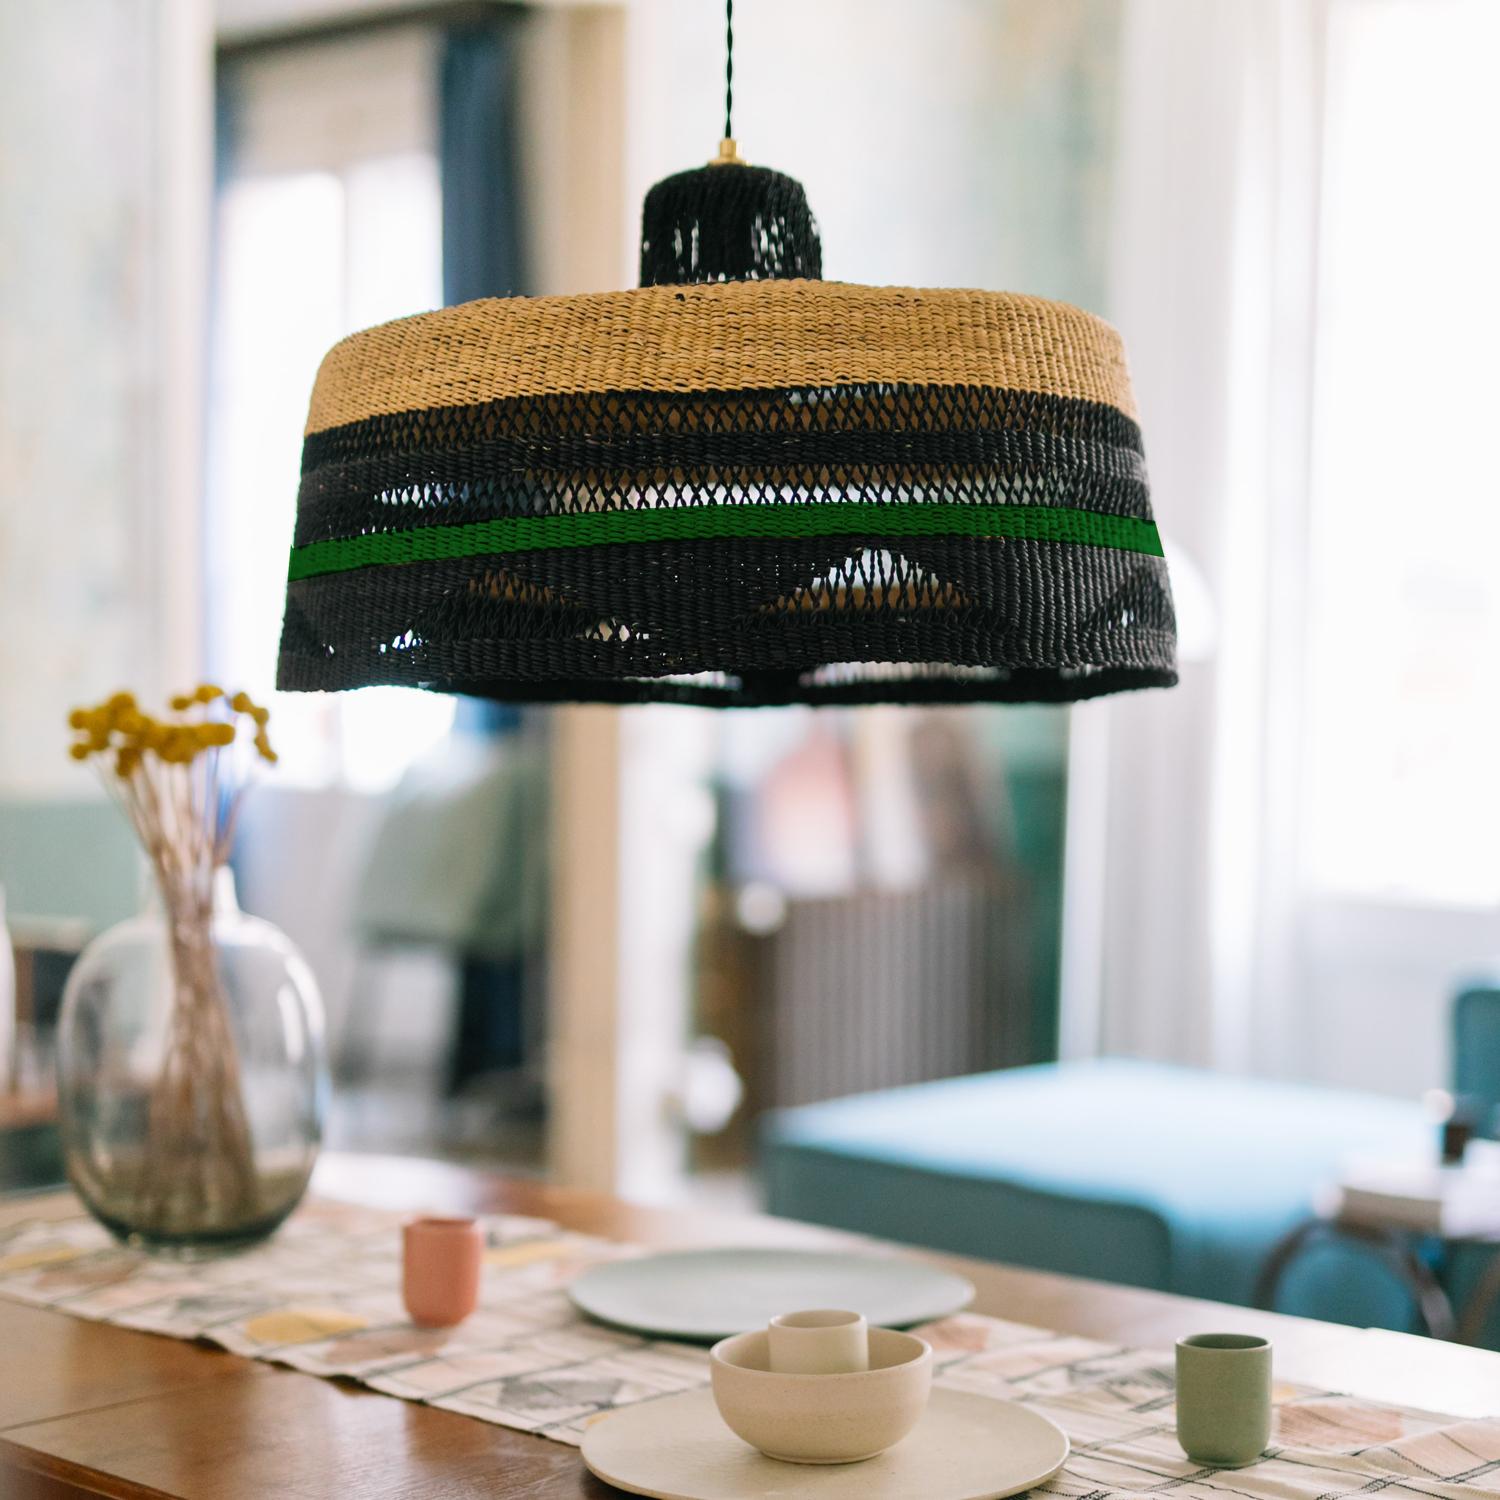 Large Woven Pendant Lamp SHADOW : 
A colourful show-stopper
Colour: Herb (bottle green) / Violet

Do you love decorative motifs and exciting colours? We can create panache in your home with our large pendant lamp with it’s open weave woven like lace